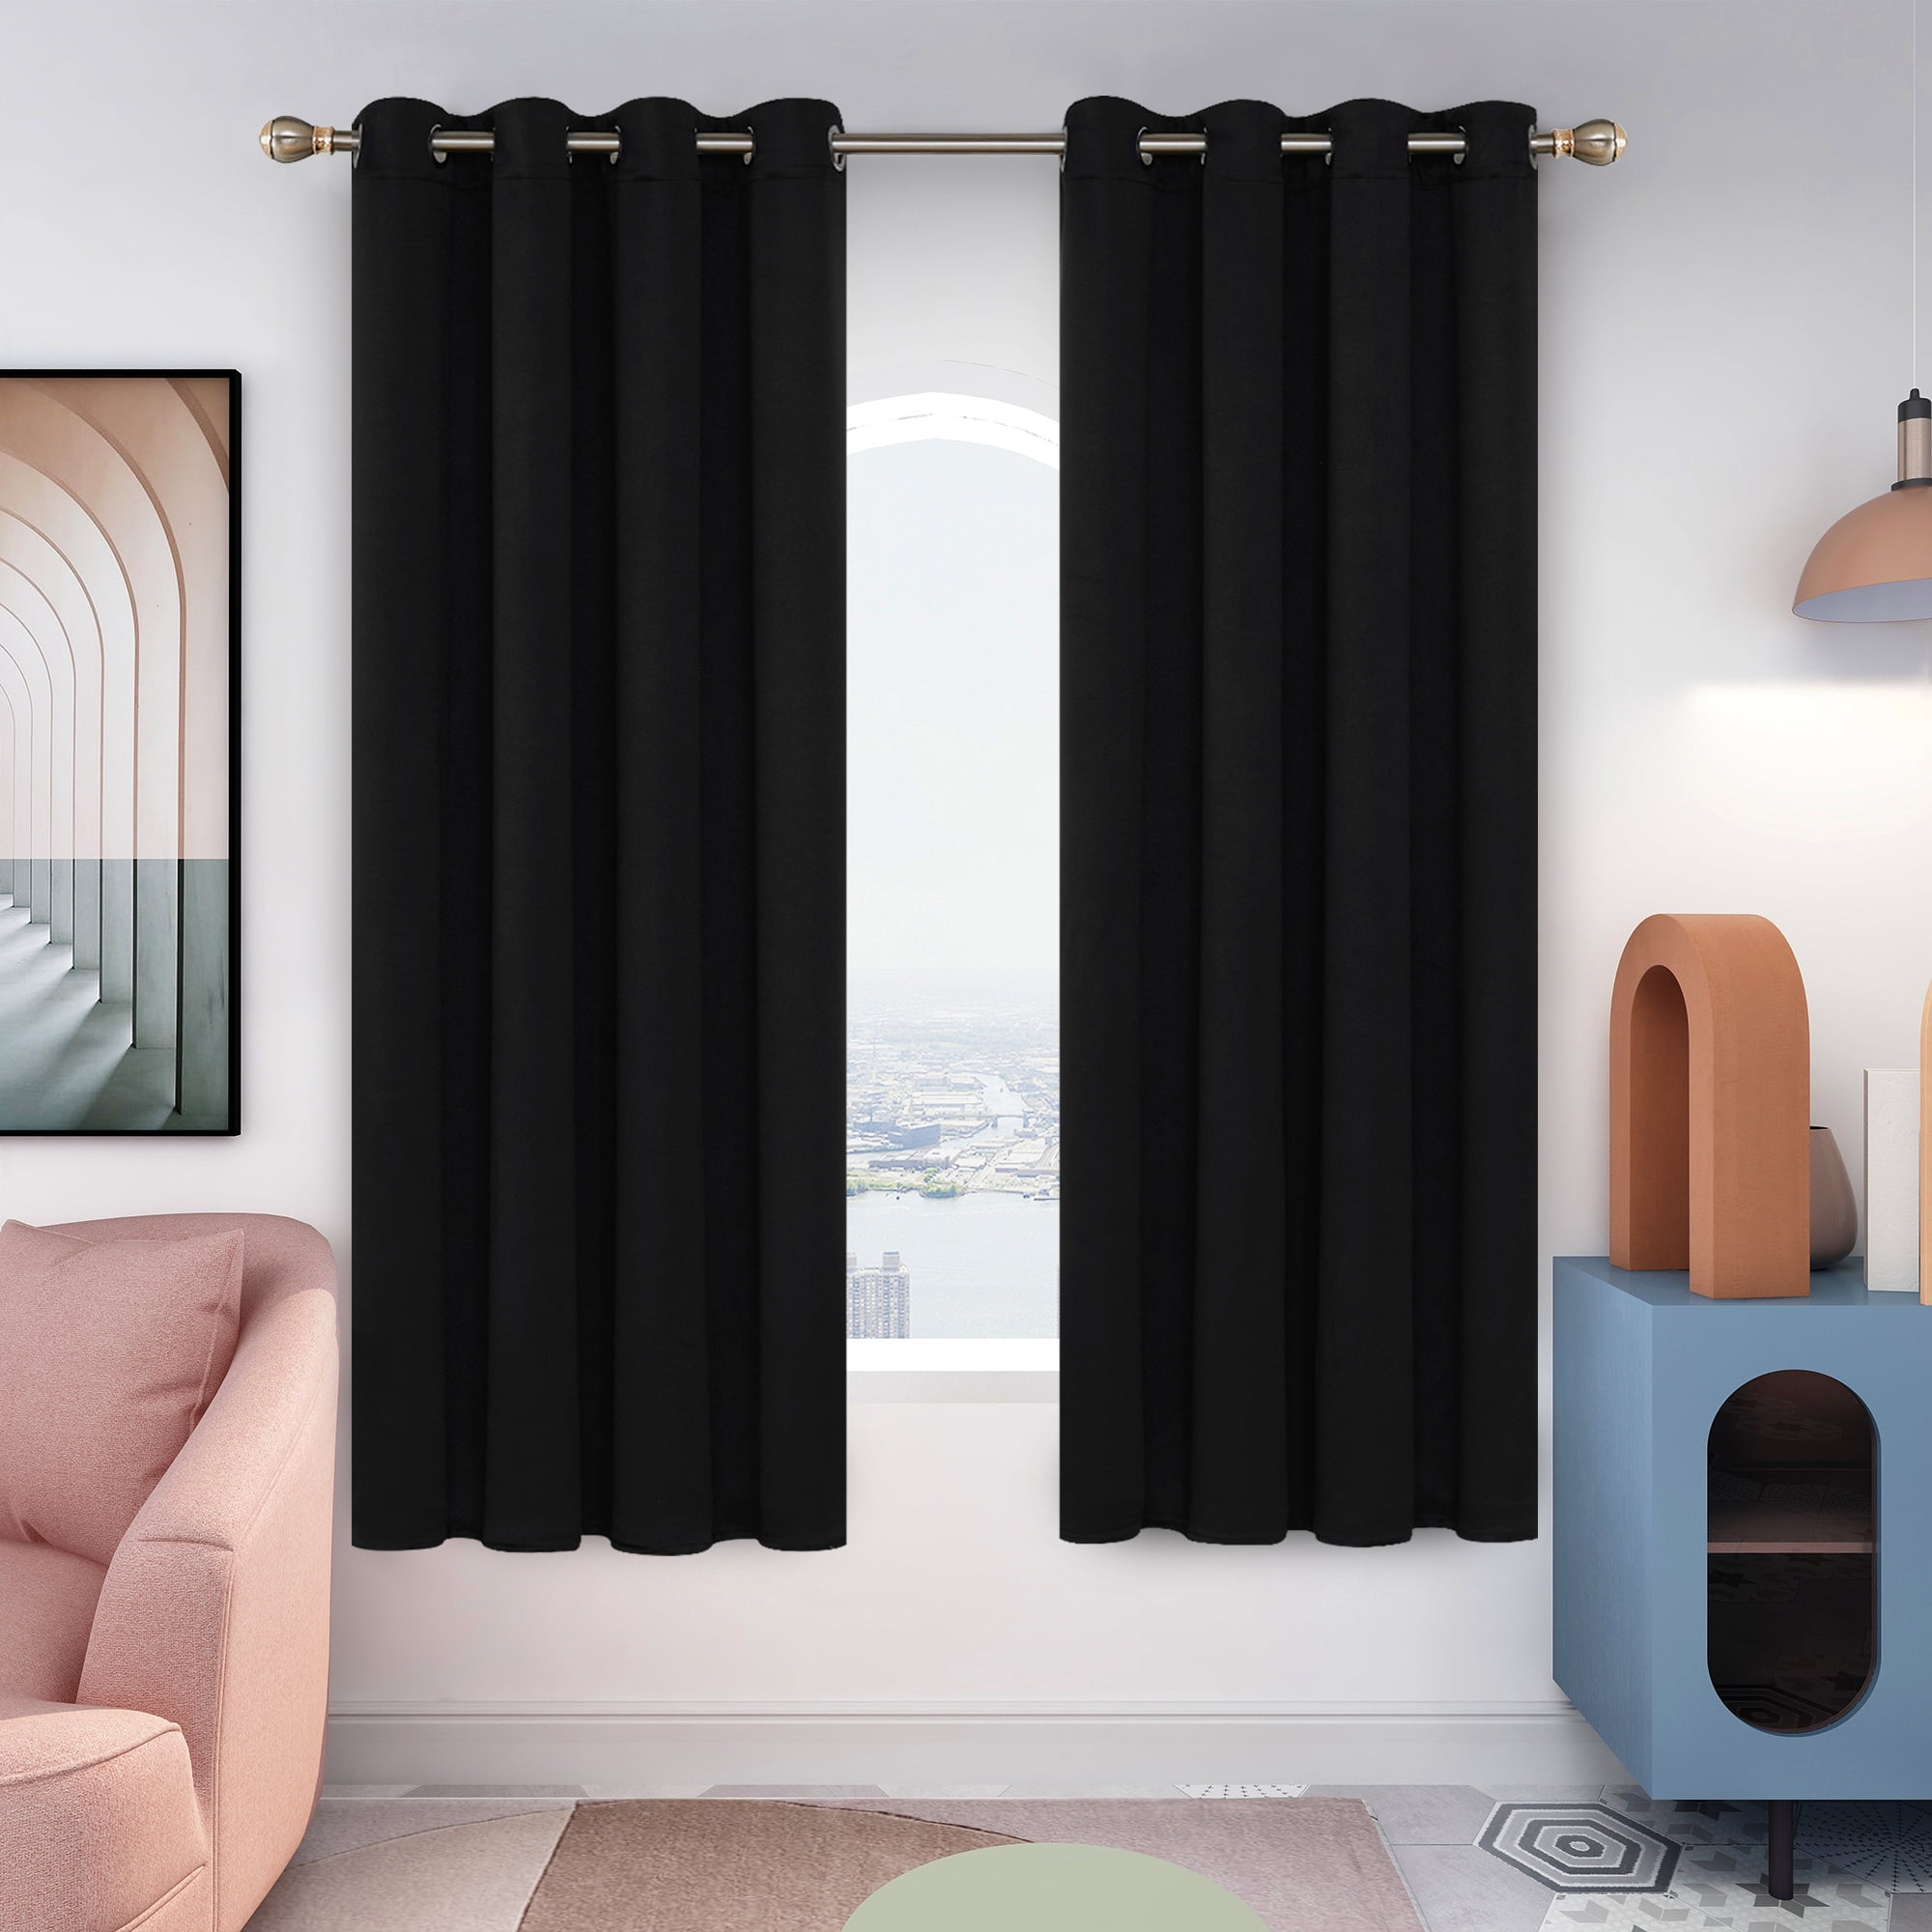 3D Blockout Curtains Bedroom Living RoomWindow Drape Holiday Ornaments 